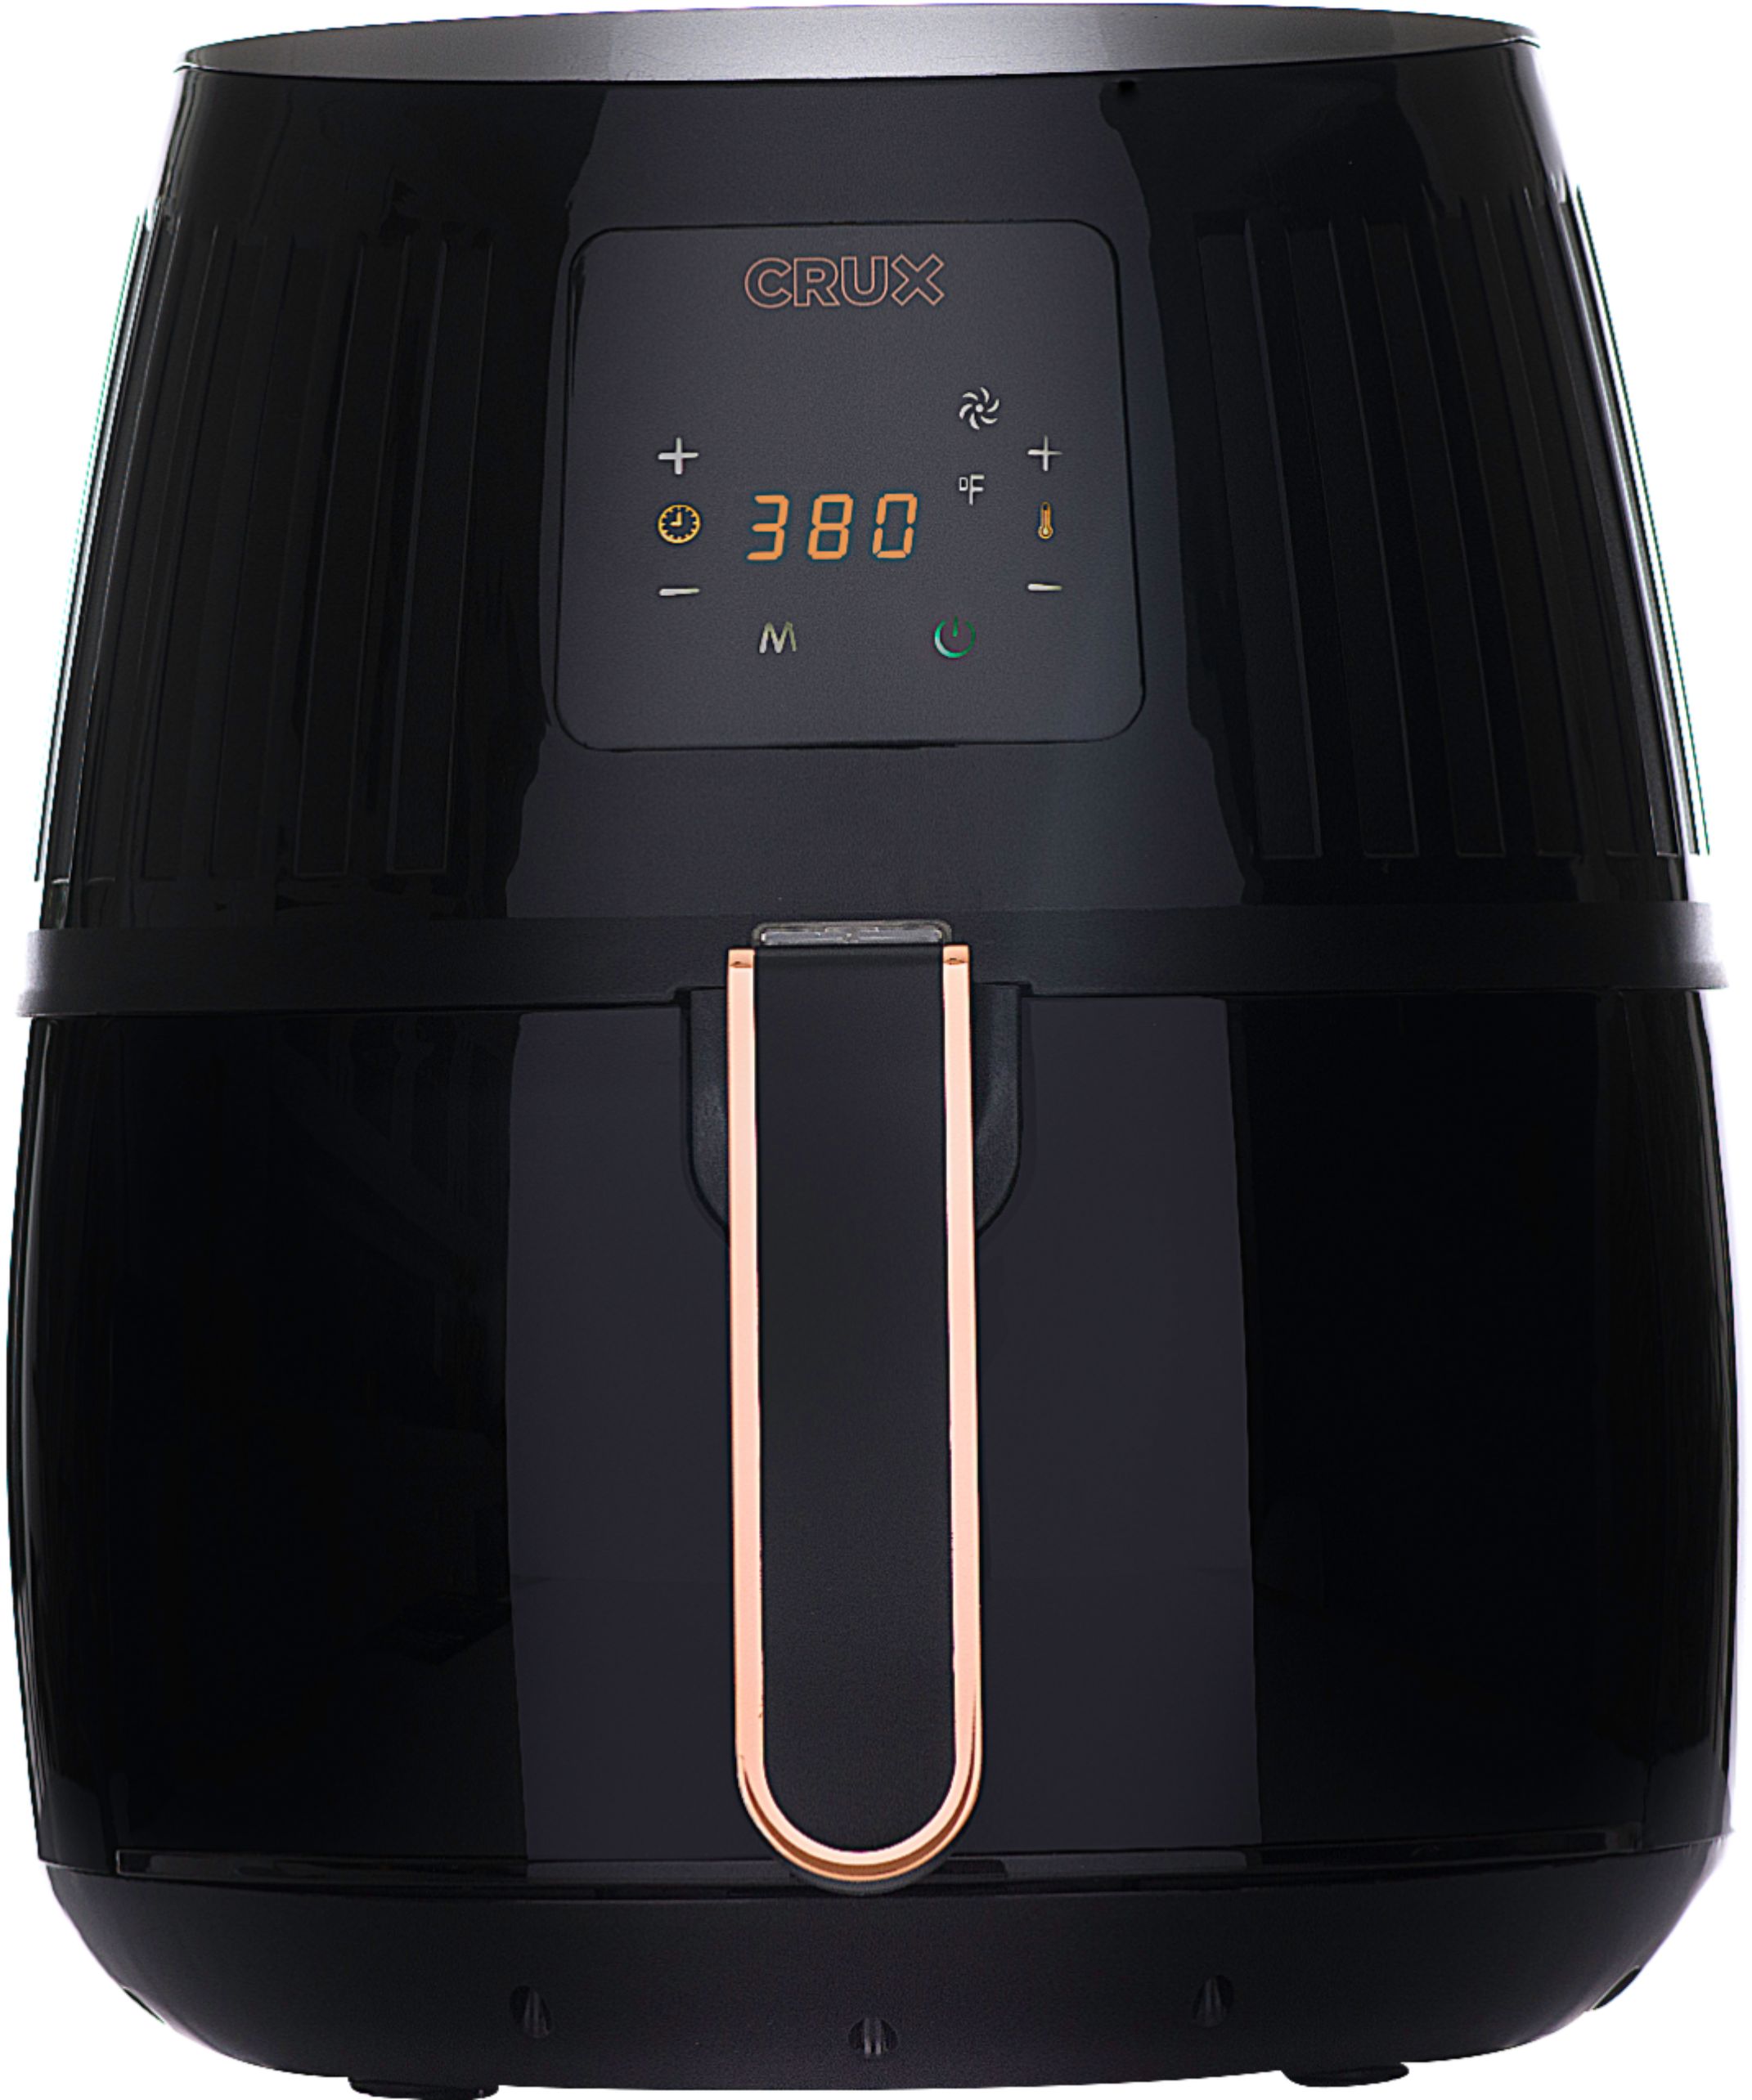 🔥Toastmaster 2.6 Quart Air Fryer RAPID HEAT CONVECTION New-In-Box🔥